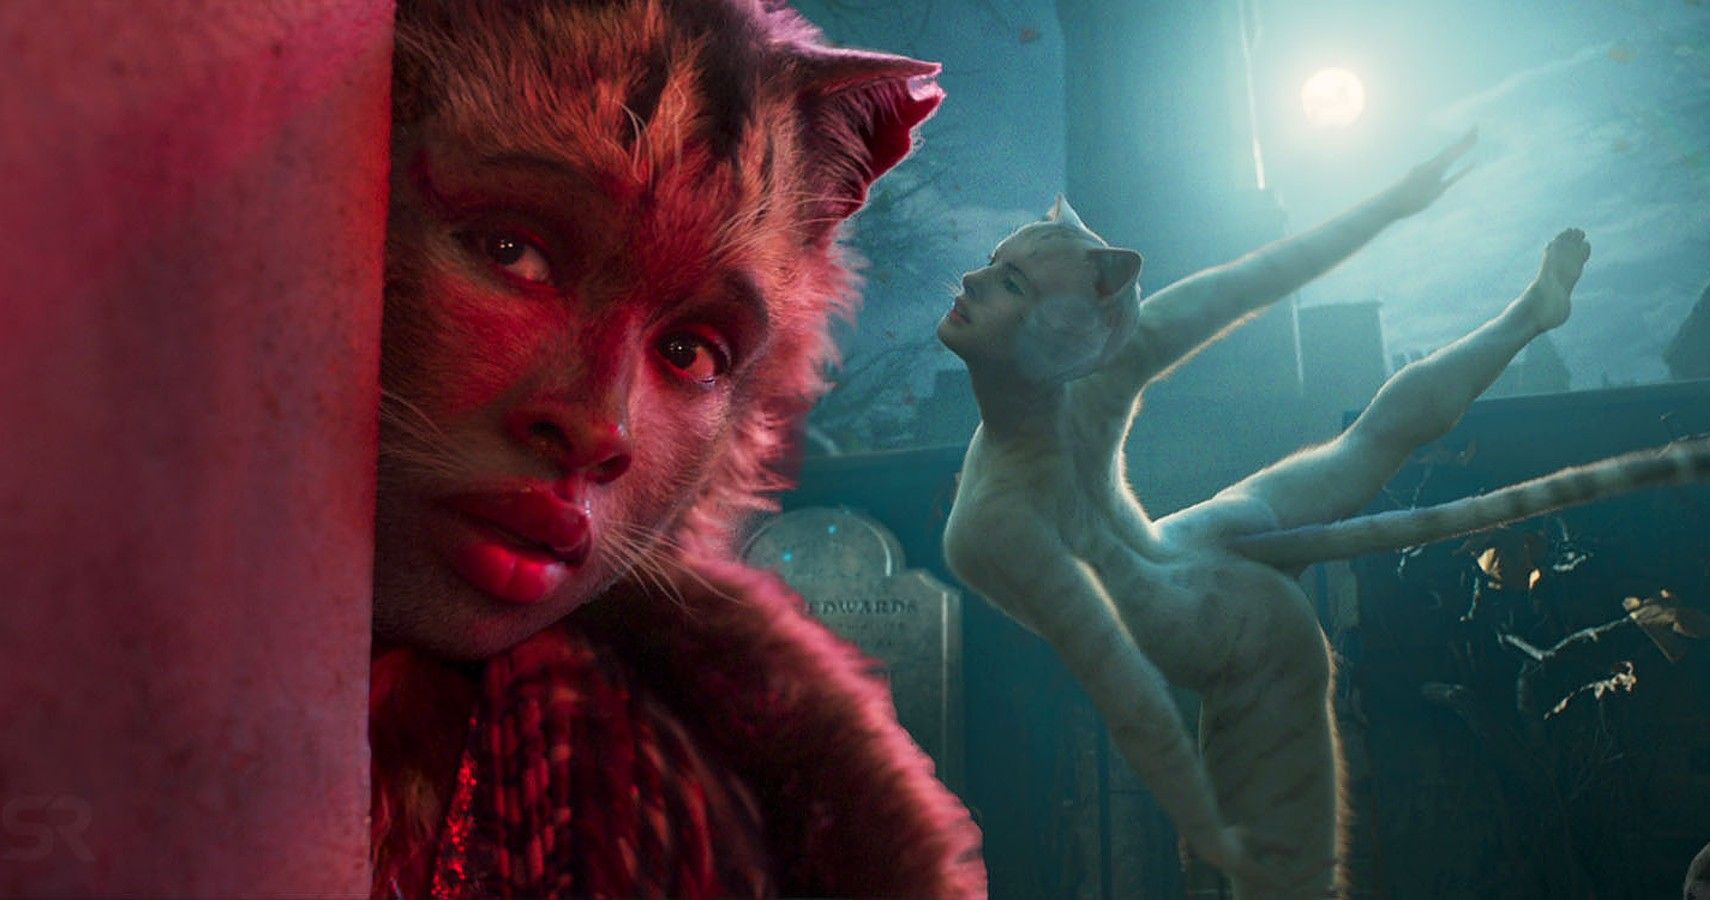 5 Reasons Why Cats Is The SoBadIt'sGood Classic Of The Decade (& 5